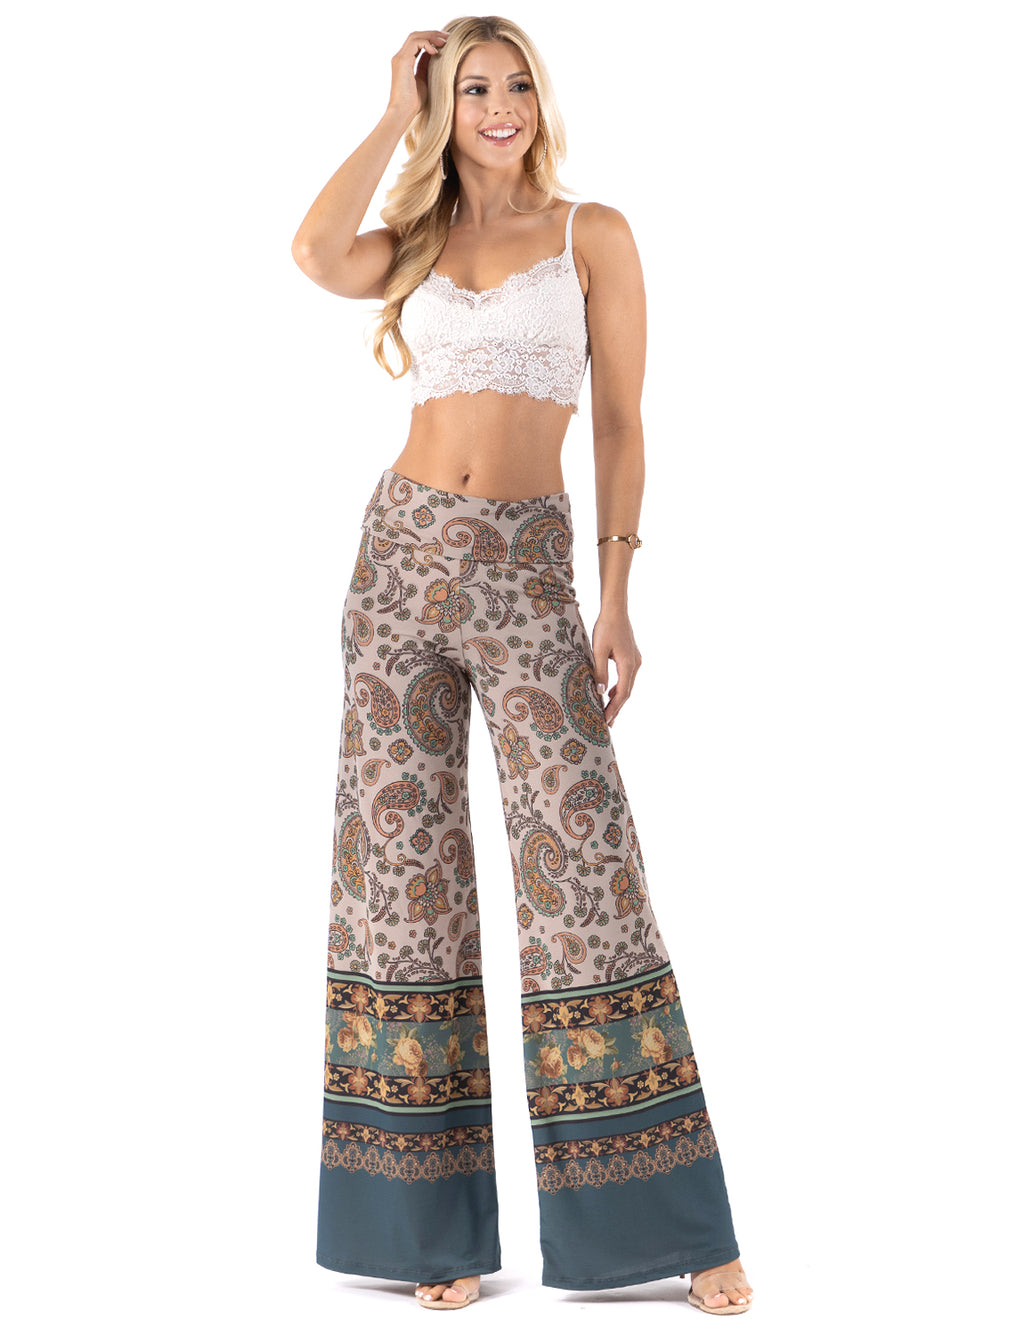 Beautiful woman wearing this amazing Tan & Floral Paisley High waist palazzo pants featuring pockets, wide legs, and a comfortable stretchy fabric 